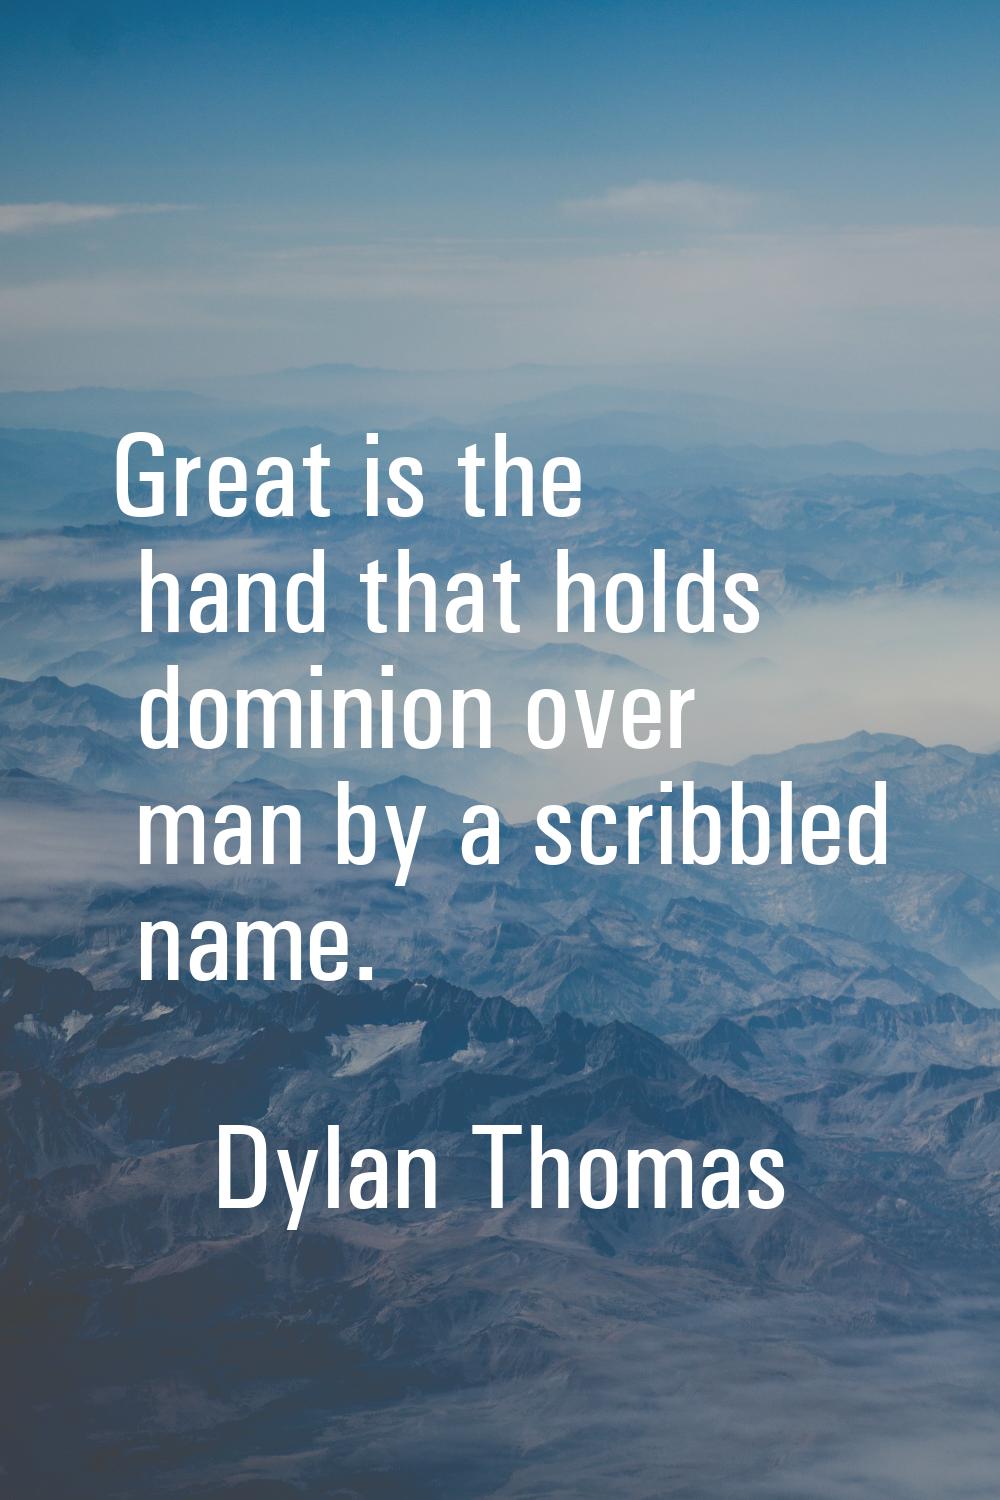 Great is the hand that holds dominion over man by a scribbled name.